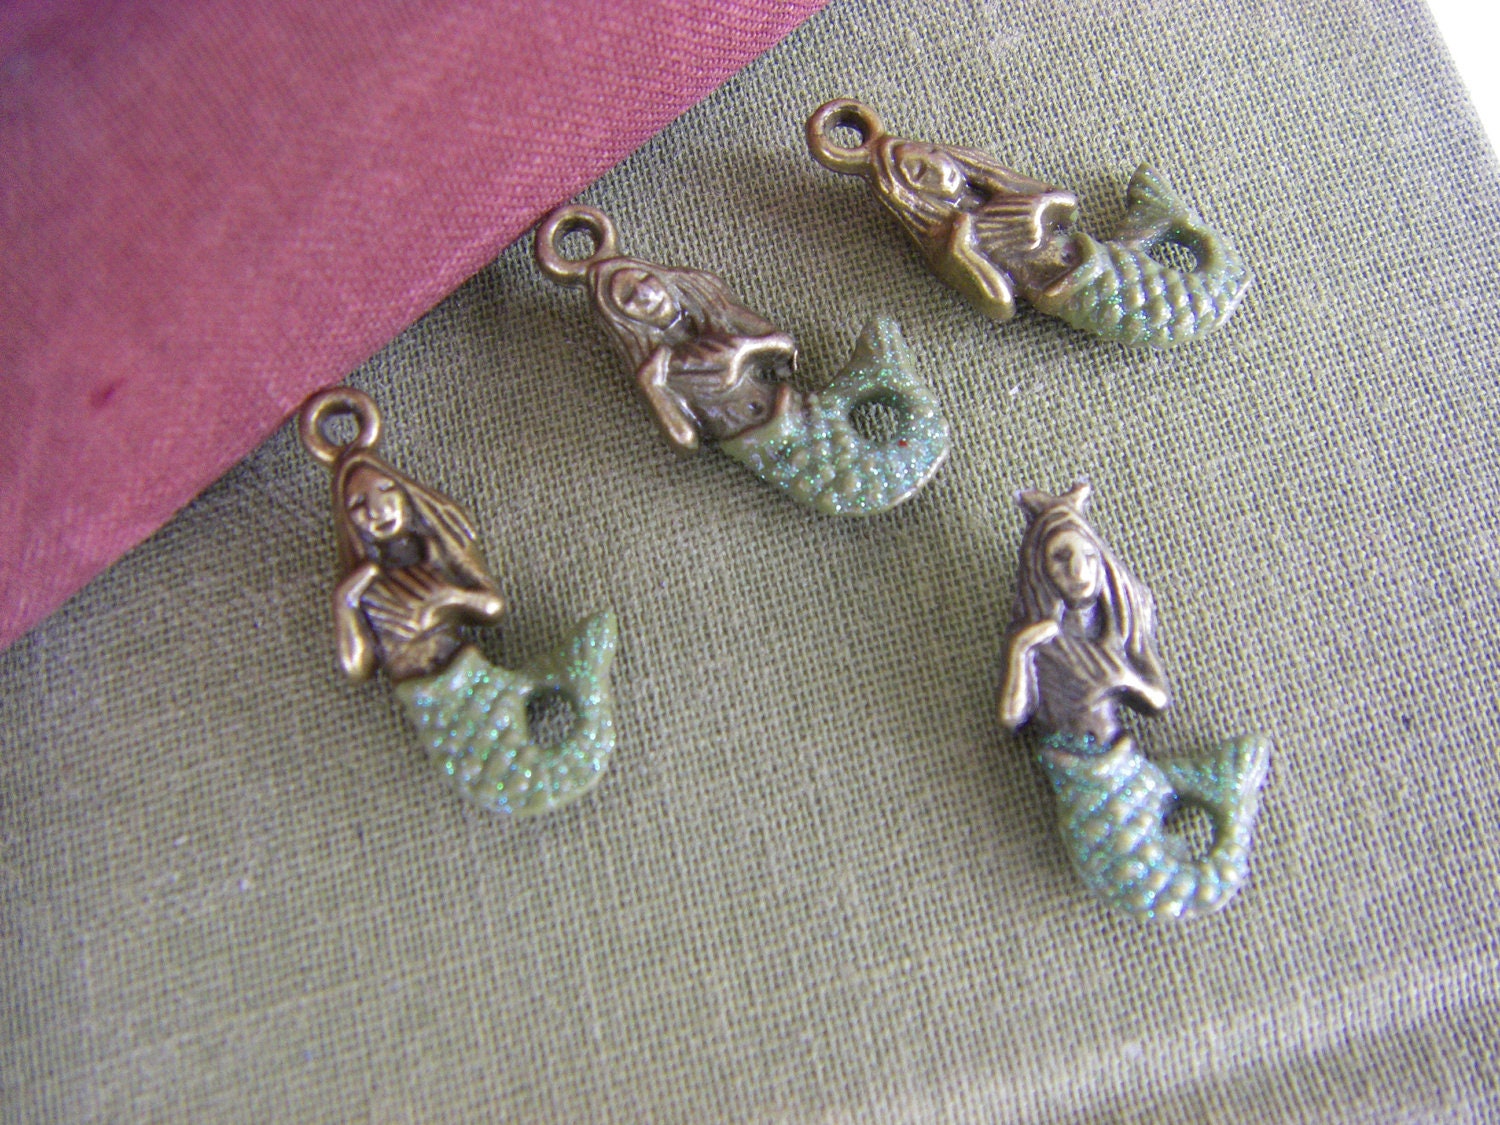 6 Hand Painted  Brass Mermaid Charms - green shimmer tails quantity 6